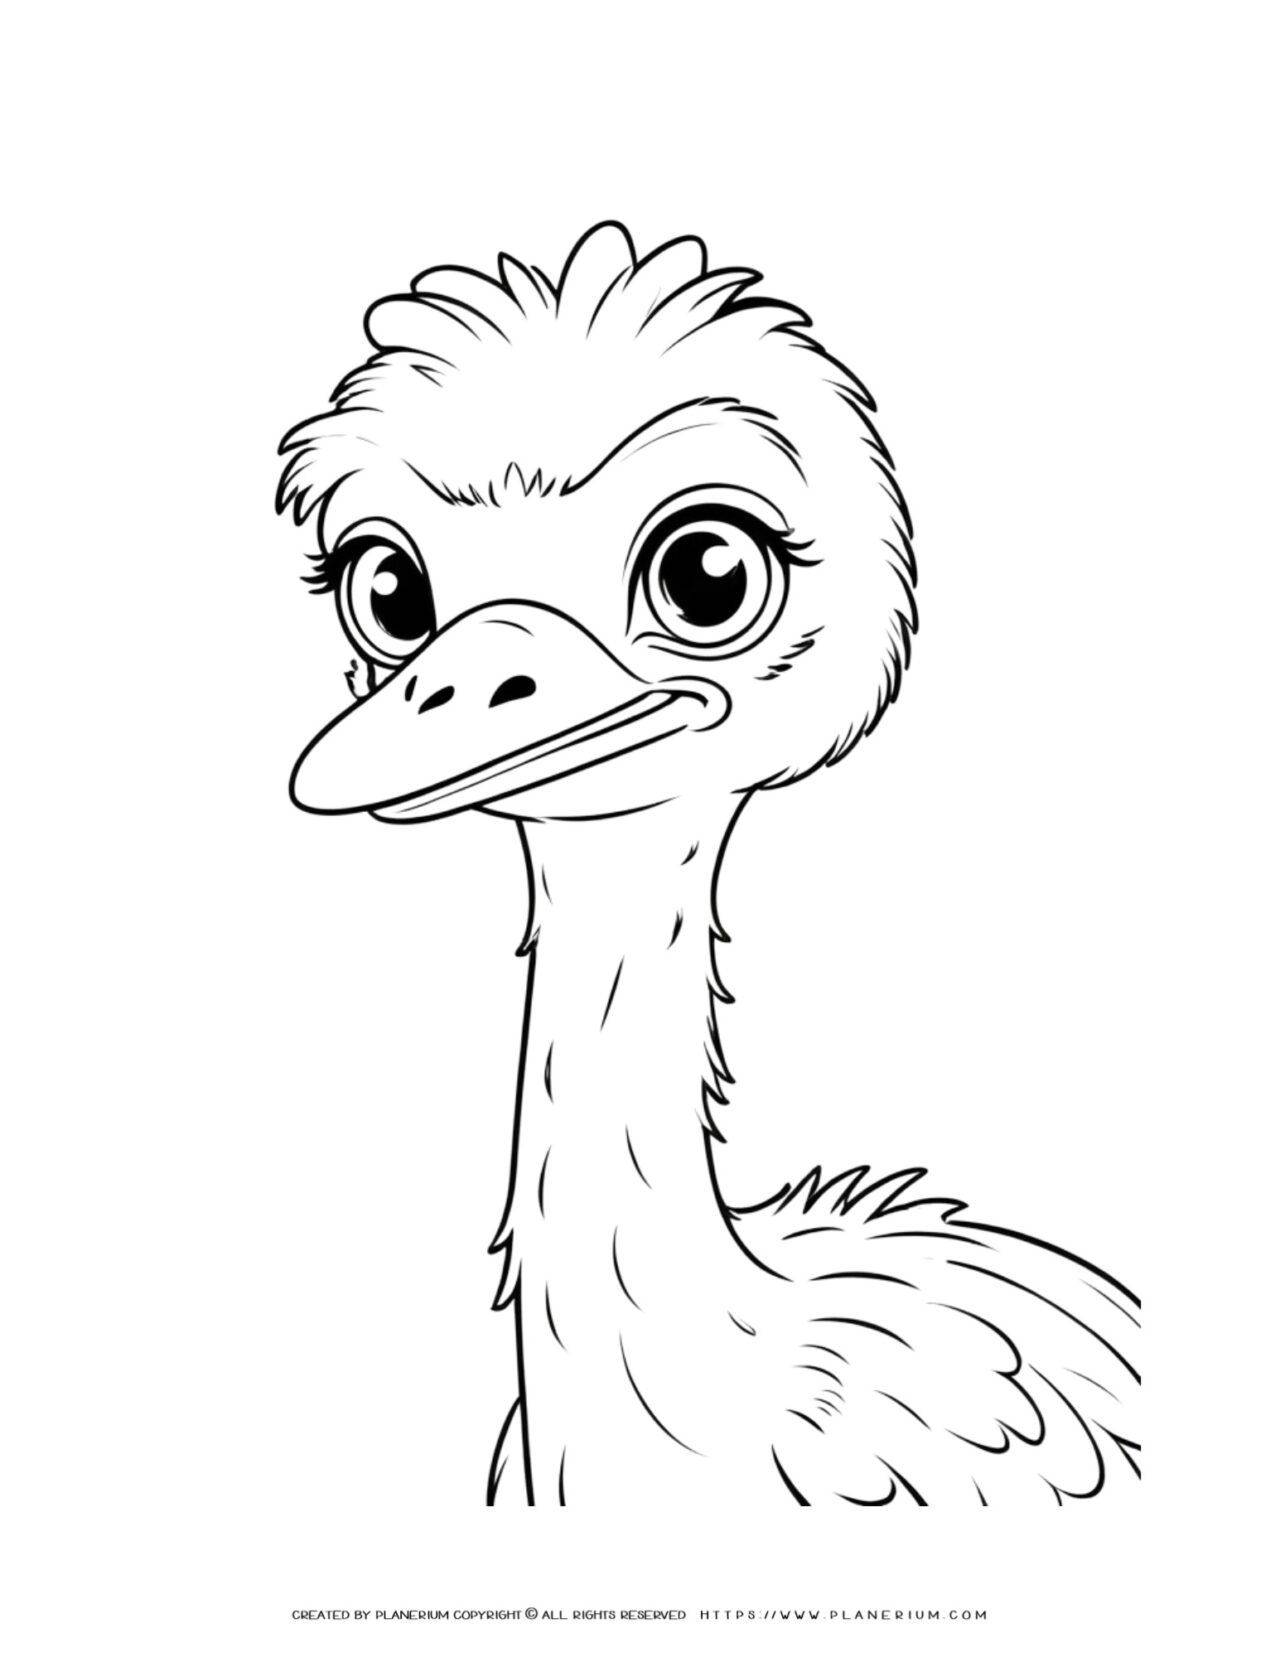 ostrich-portrait-outline-comic-style-coloring-page-for-kids